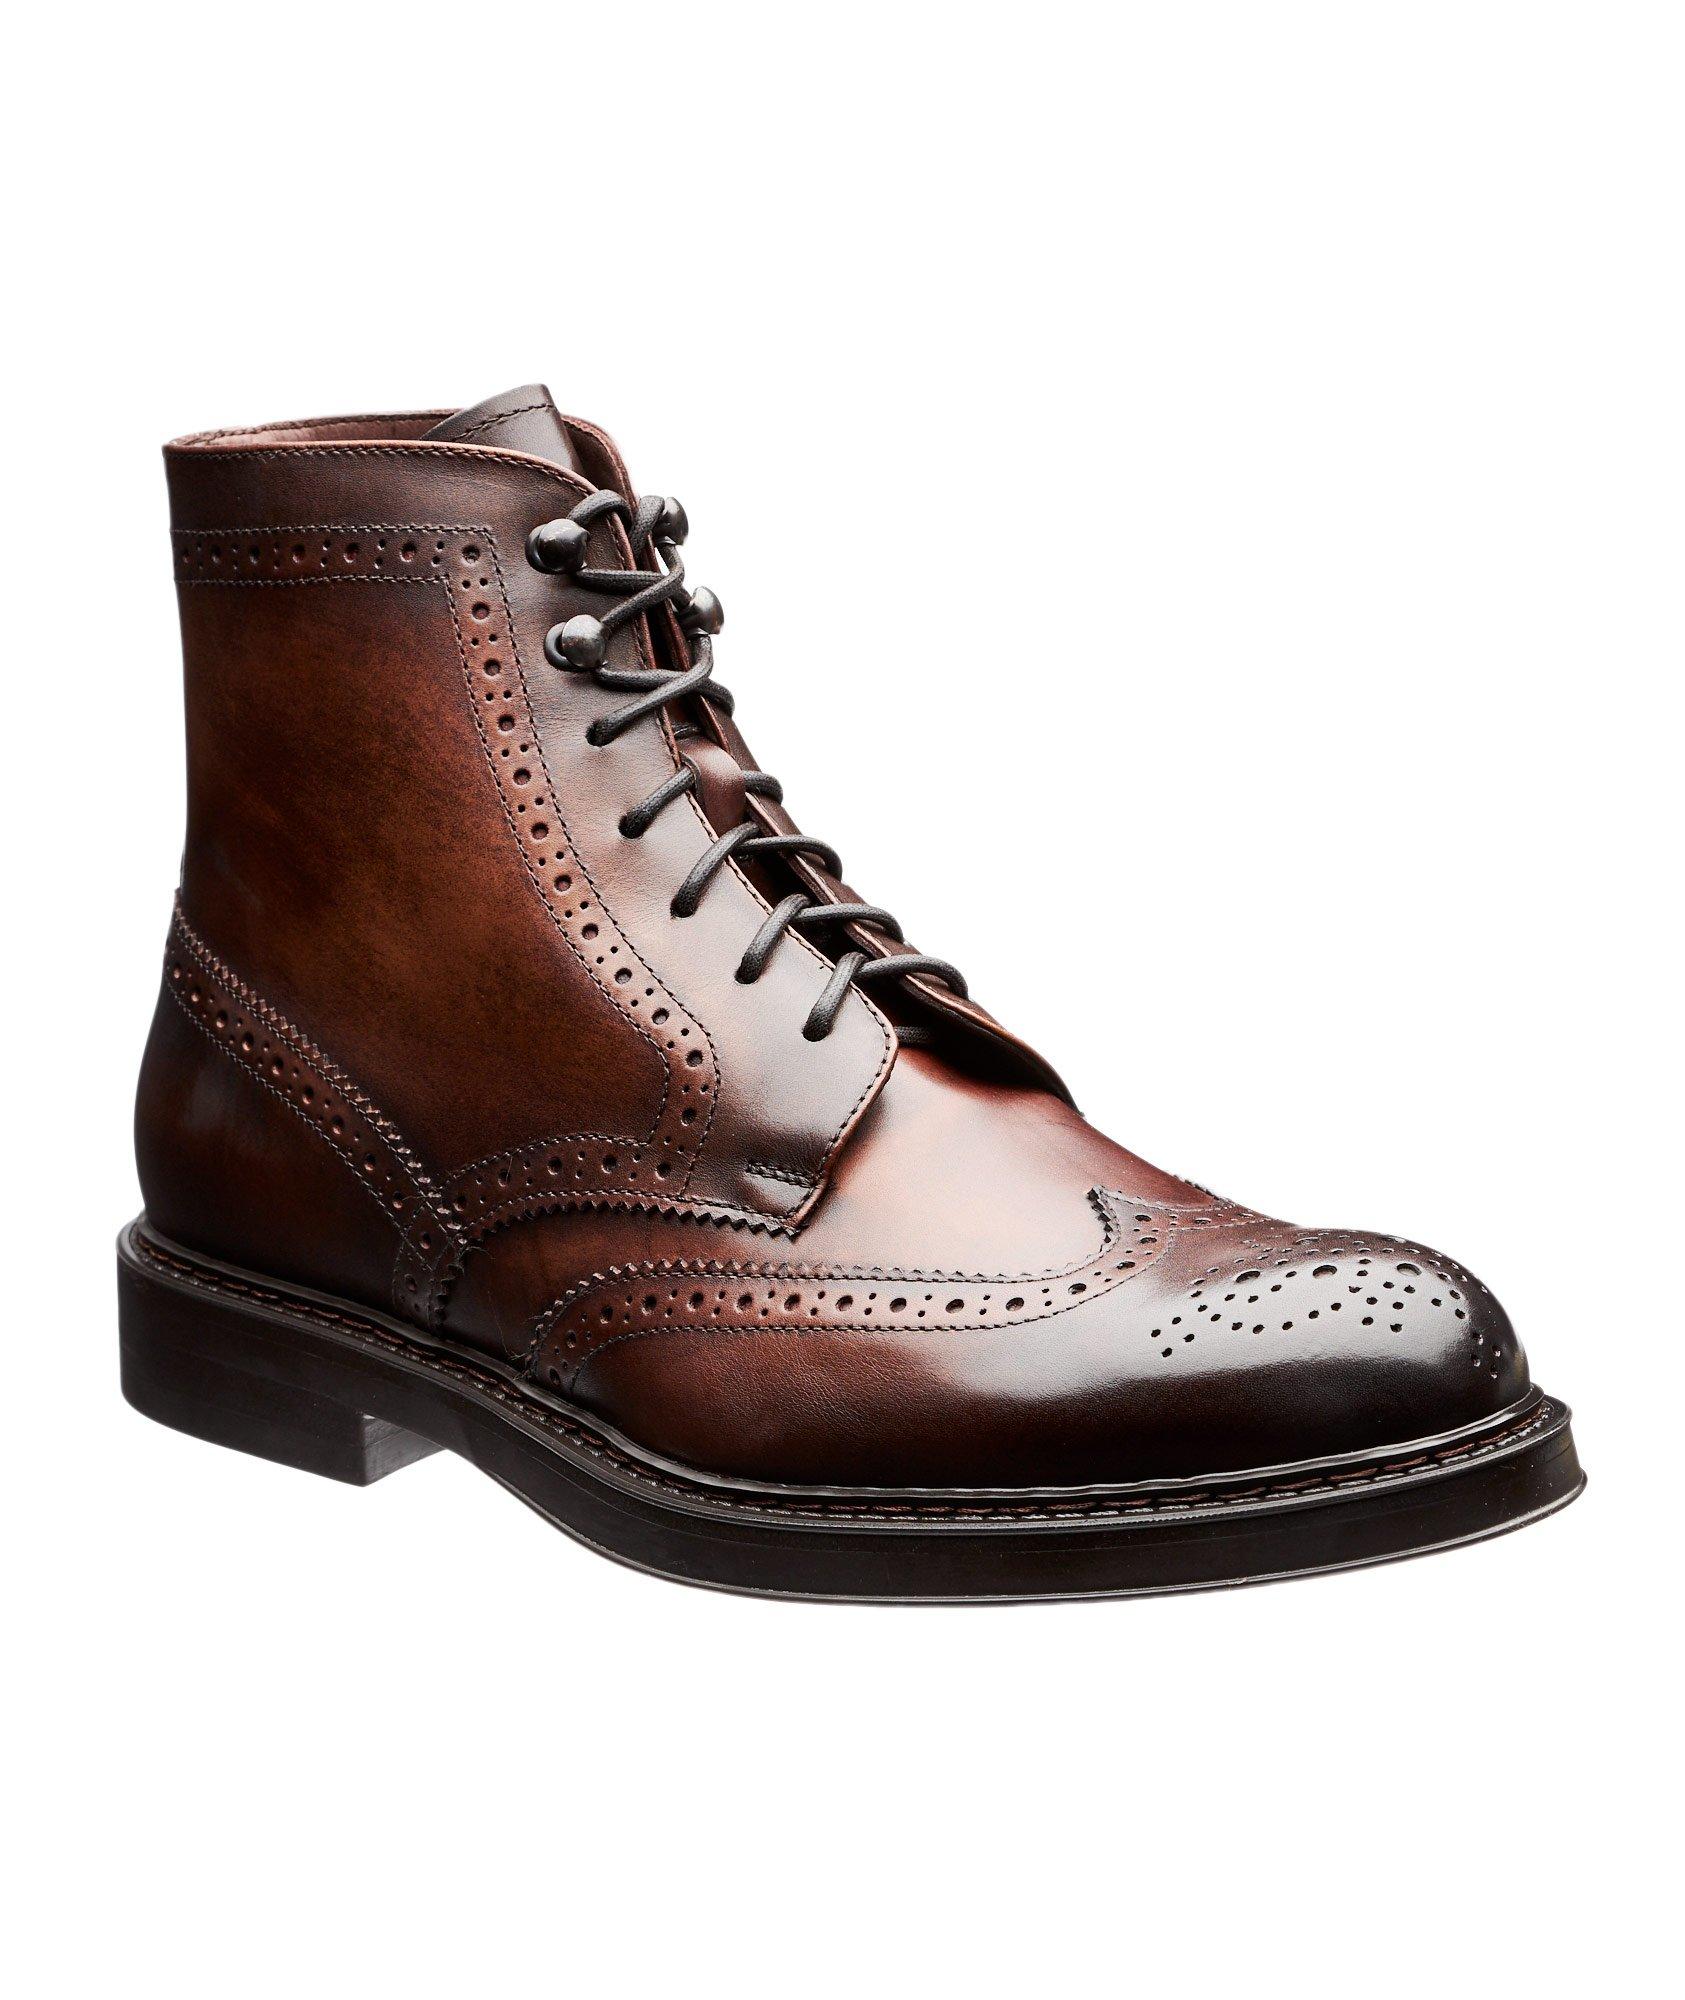 Leather Wingtip Boots image 0